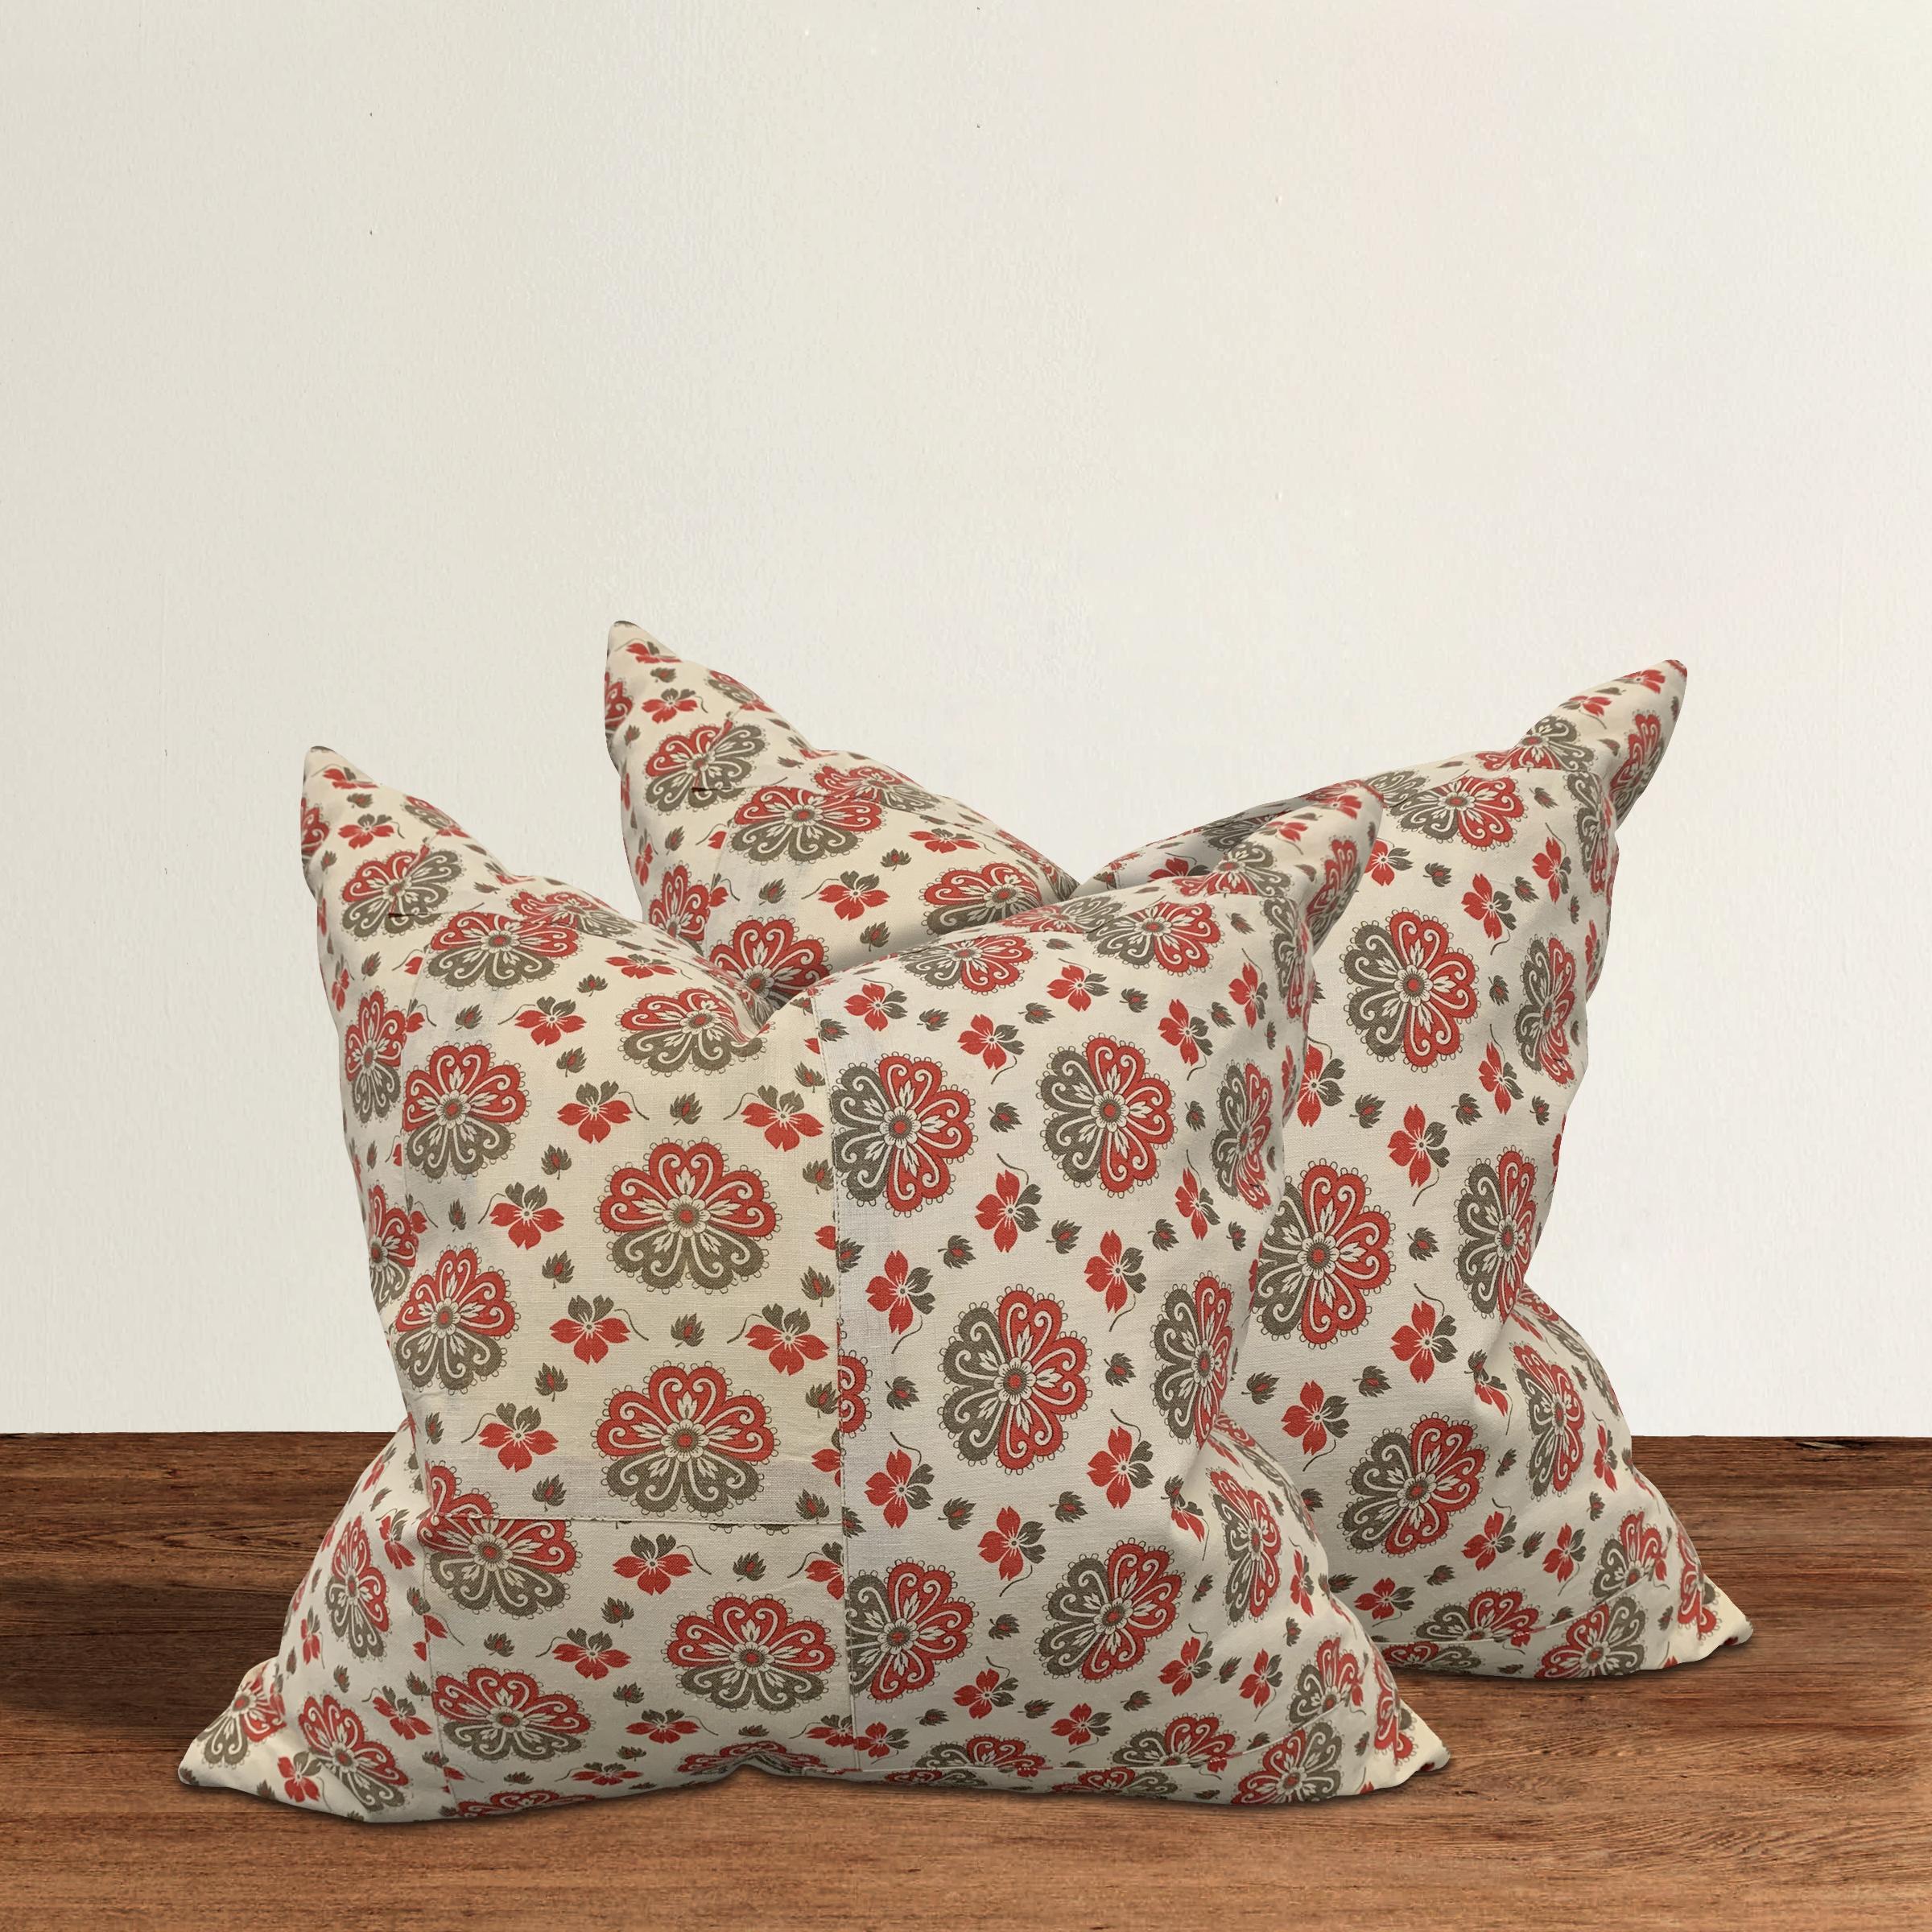 Pair of pillows made from 19th century Russian block printed cotton panels with large red and brown flowers, backed with solid linen and filled with down.